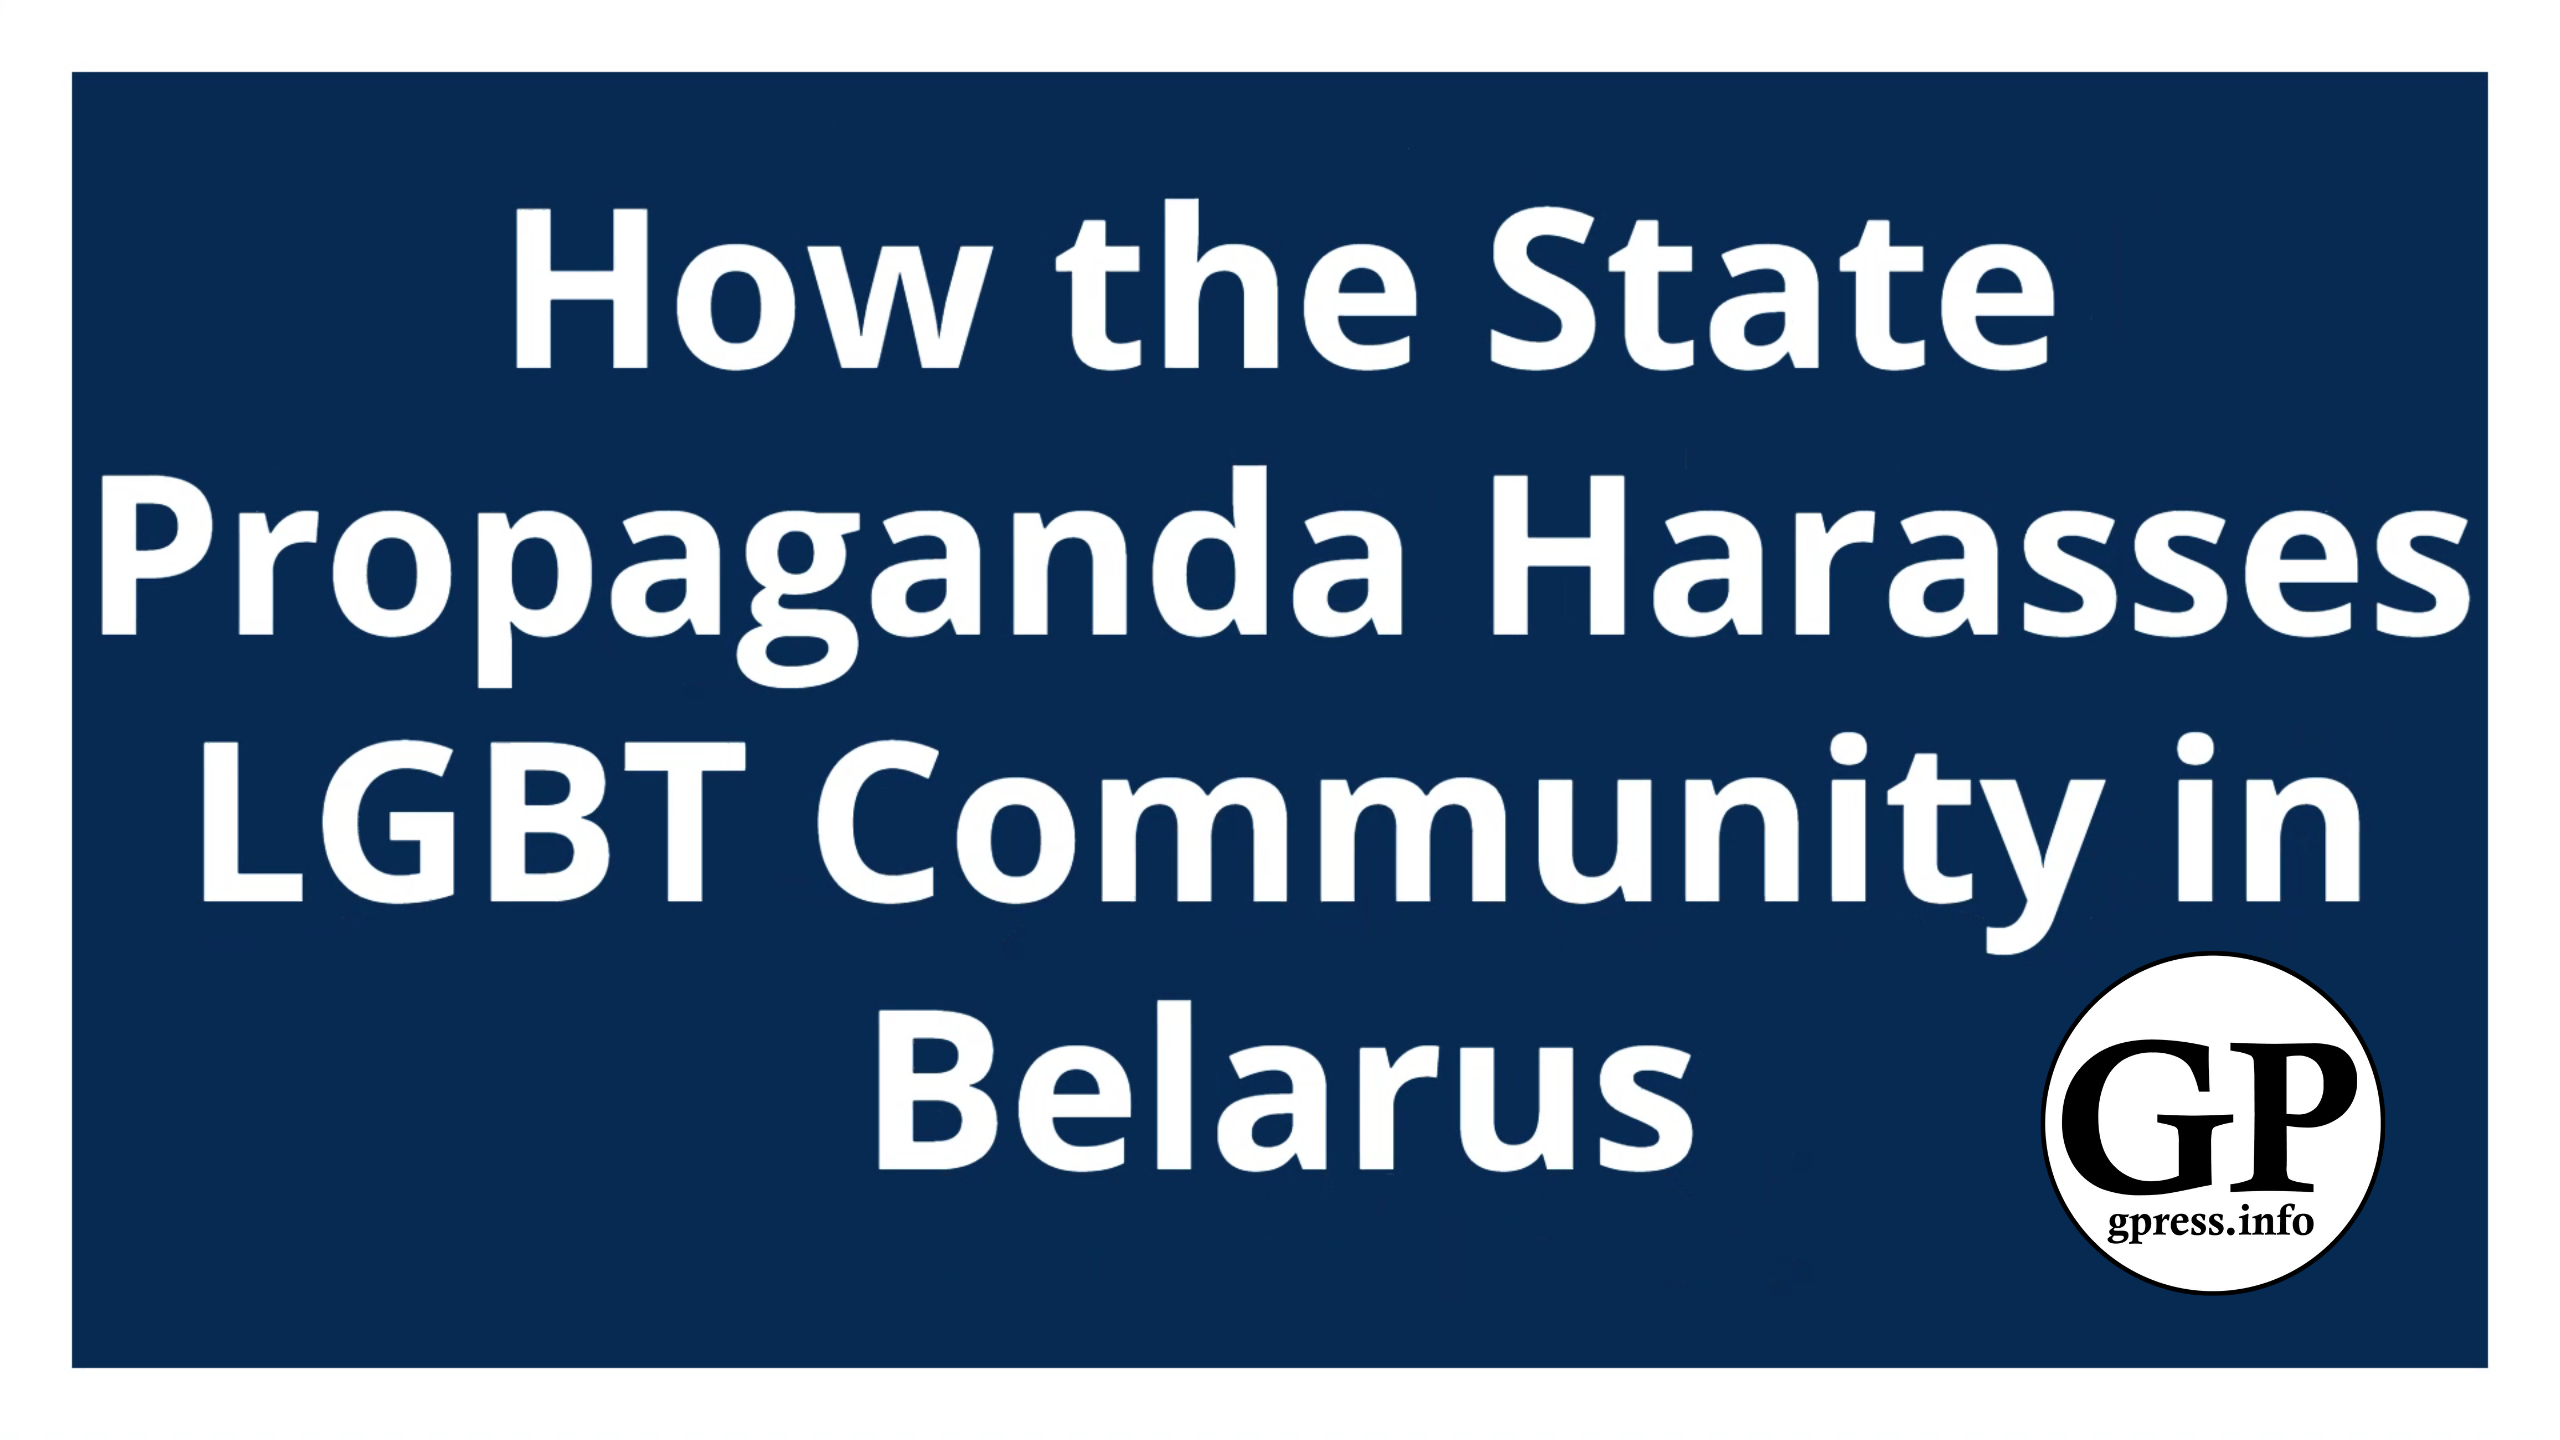 How the State Propaganda Harasses LGBT Community in Belarus